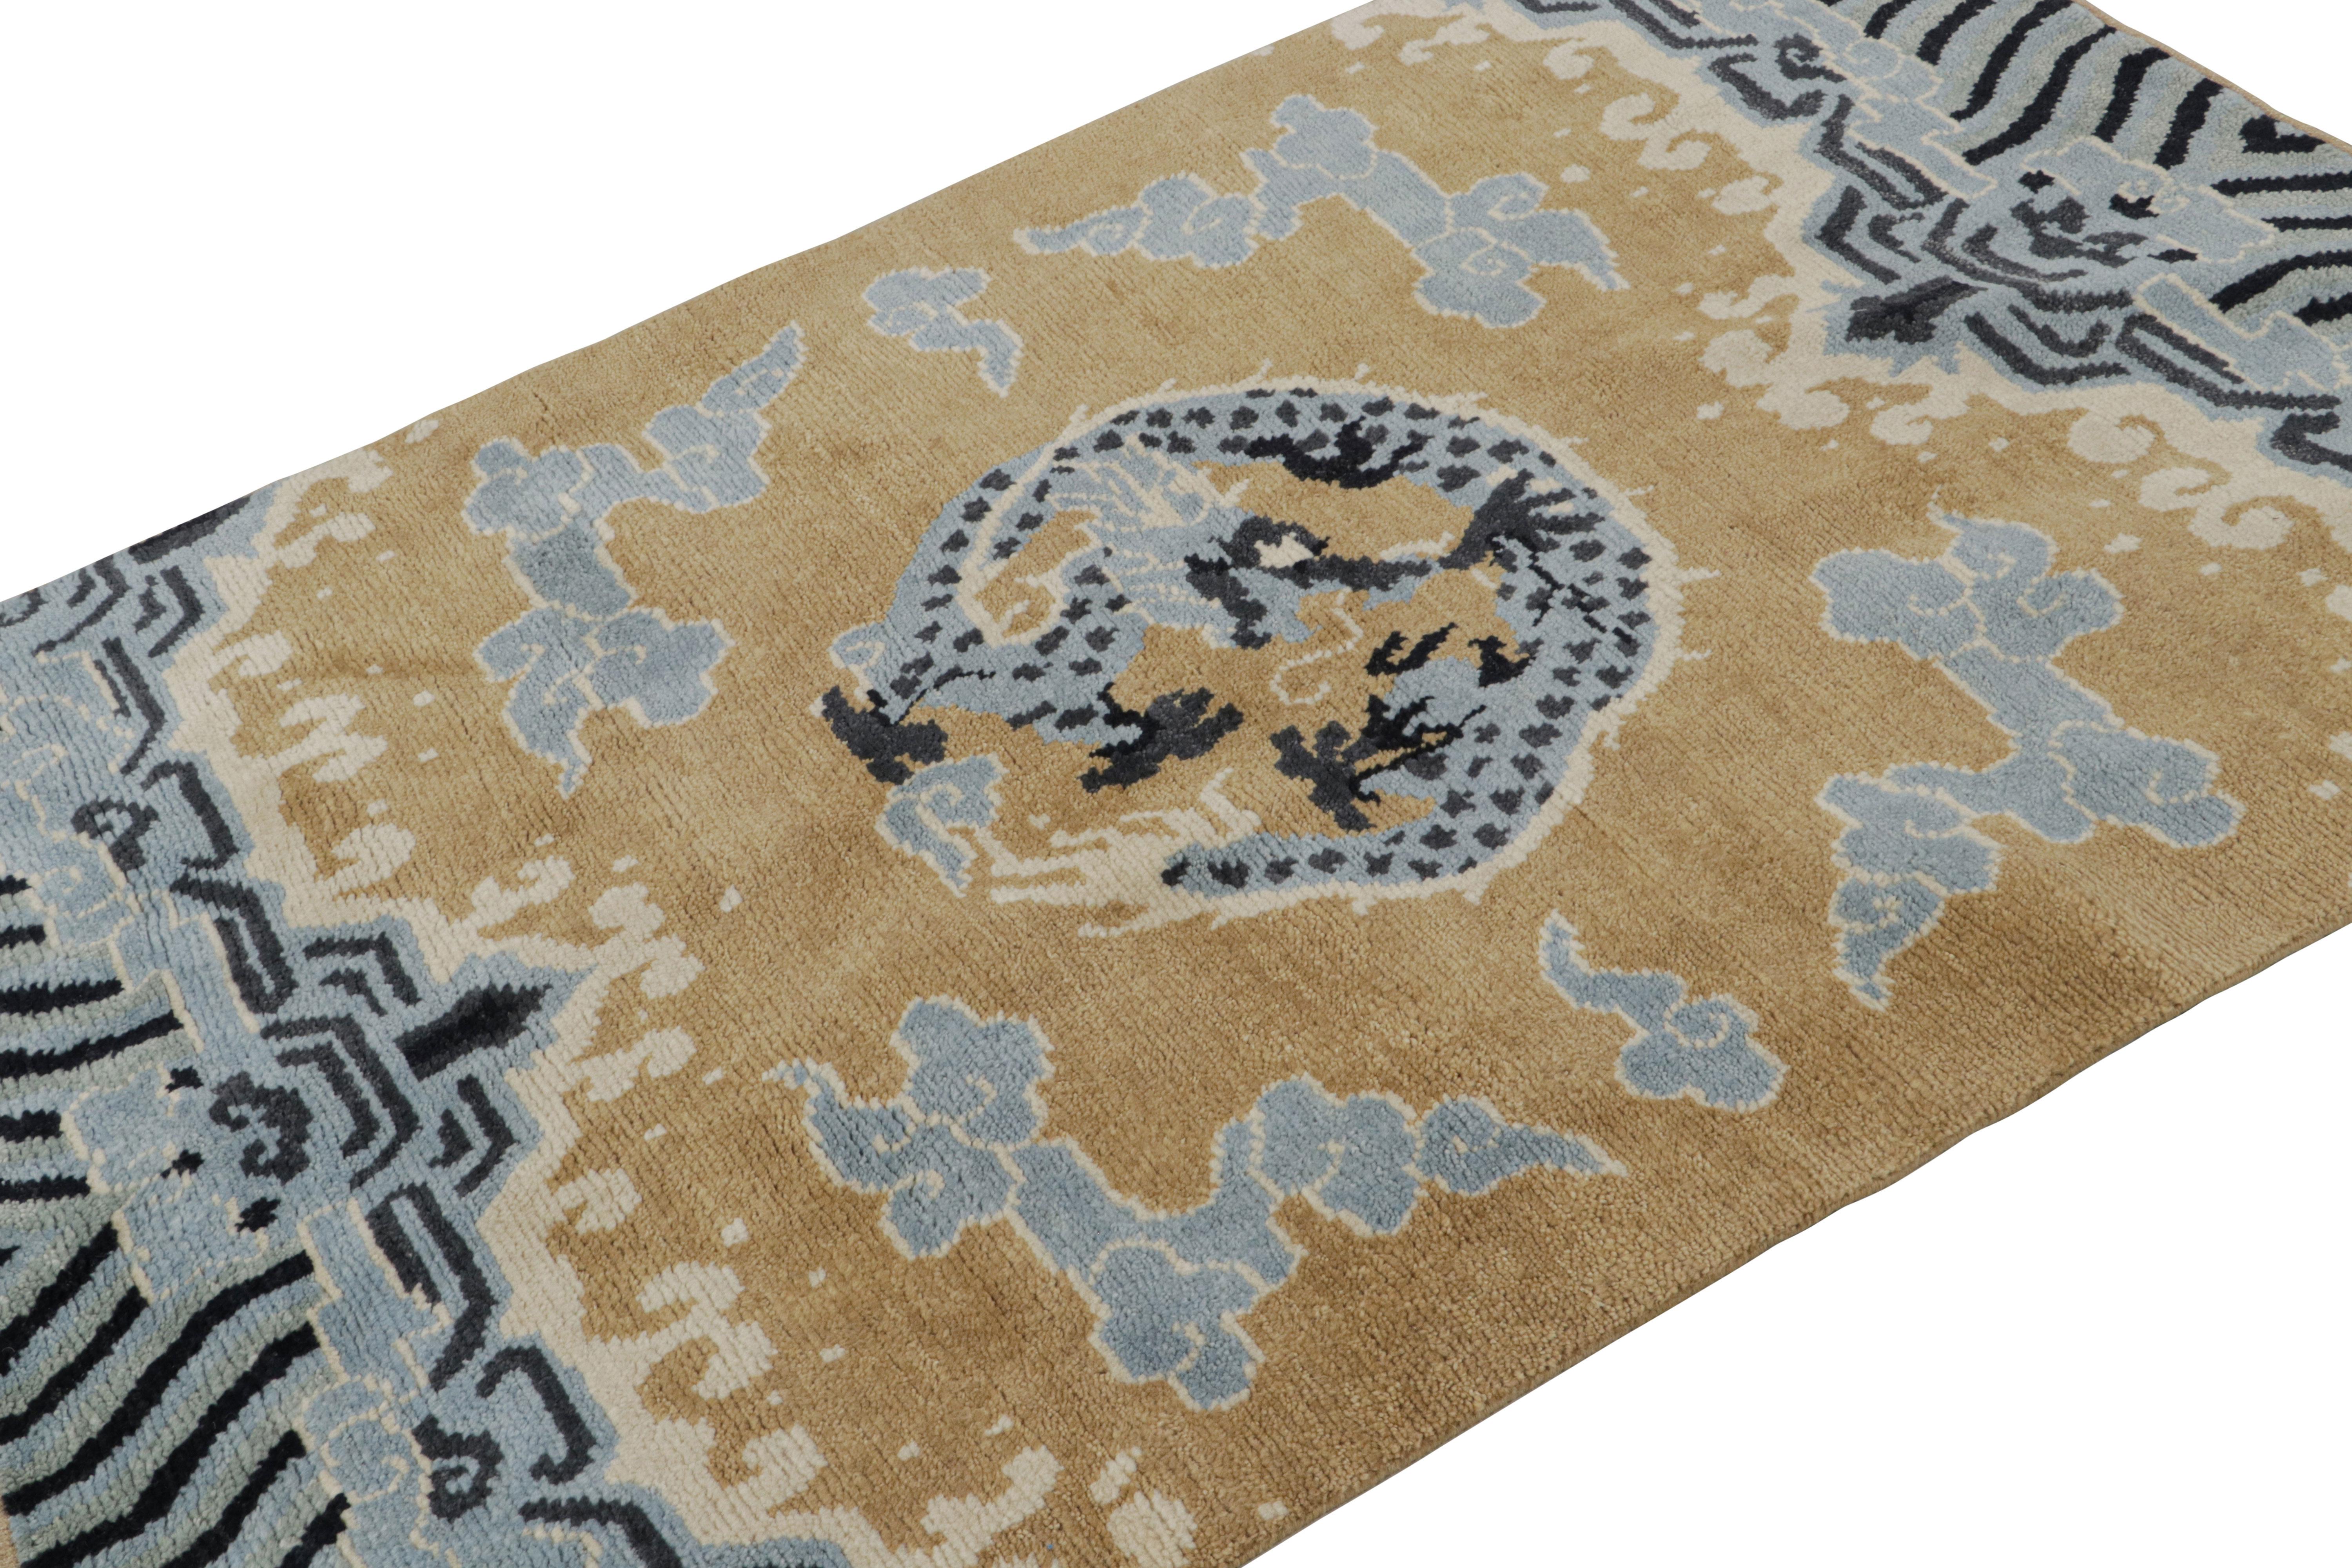 This 4x6 rug from the Modern Classics Collection is inspired by a turn-of-the-century Ningxia rug with dragon pictorials. 

On the design: 

Connoisseurs will admire Ningxia as a particular quality of Chinese rugs and even East Turkestani Khotan